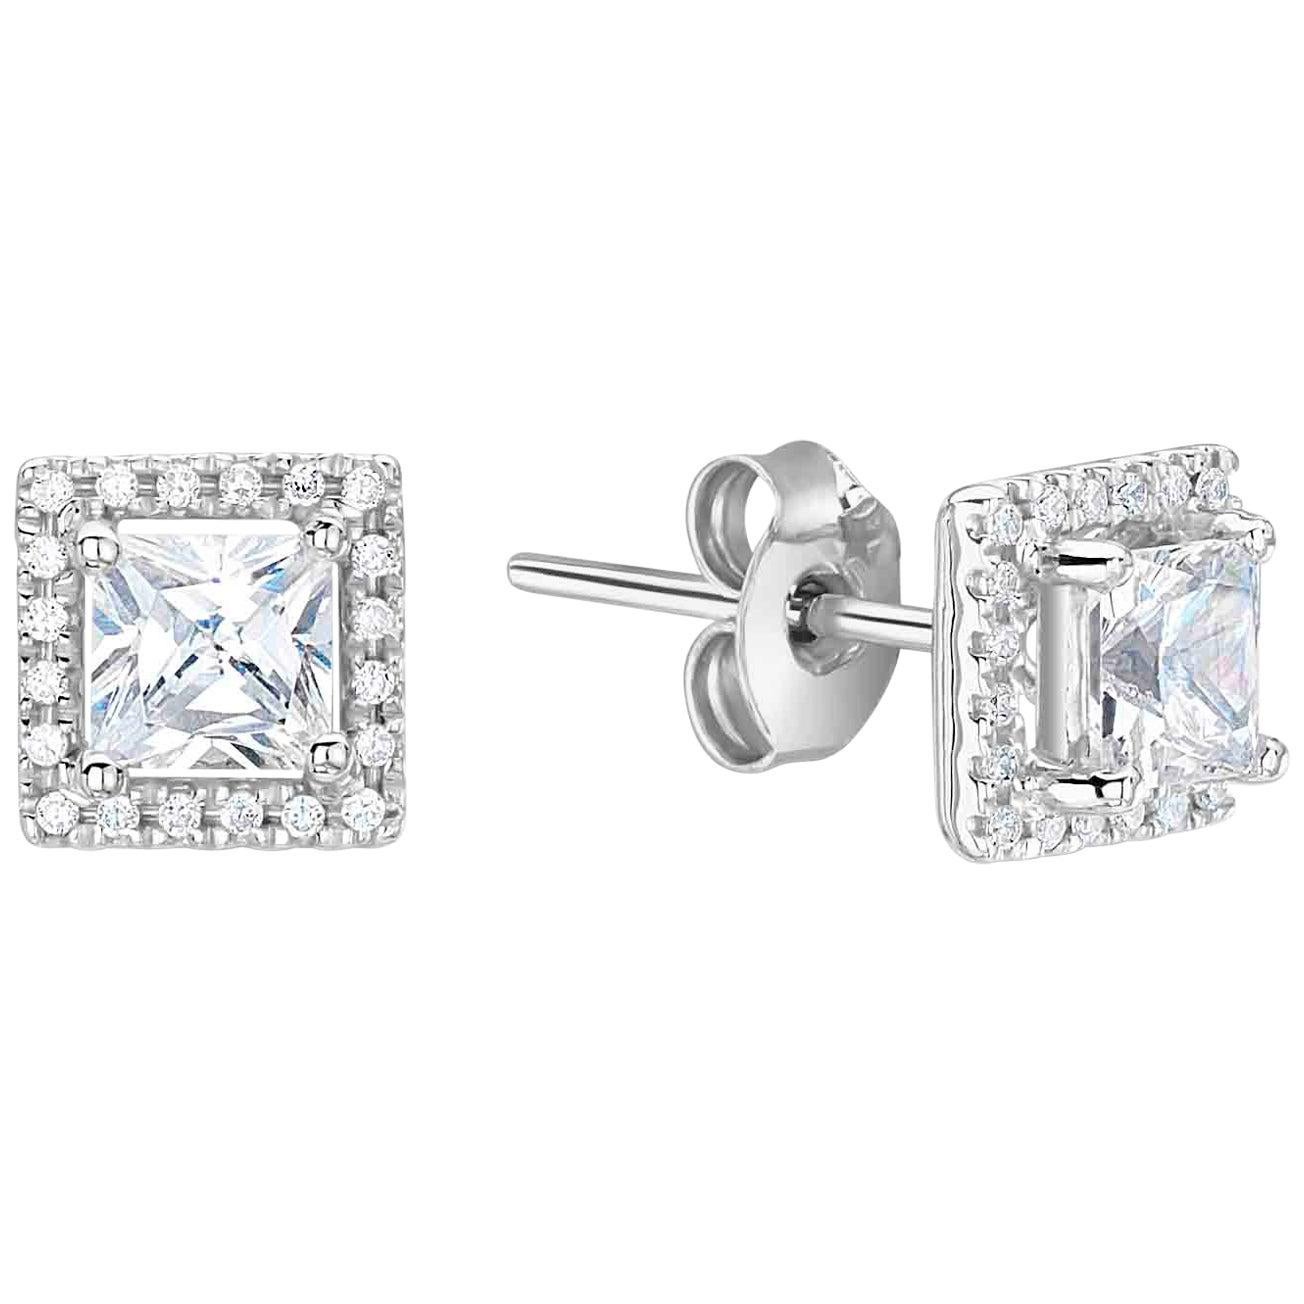 Available in 18 carat white gold or platinum 950, these stud earrings are designed for a 0.25-0.50 carat, square cut centre stone.